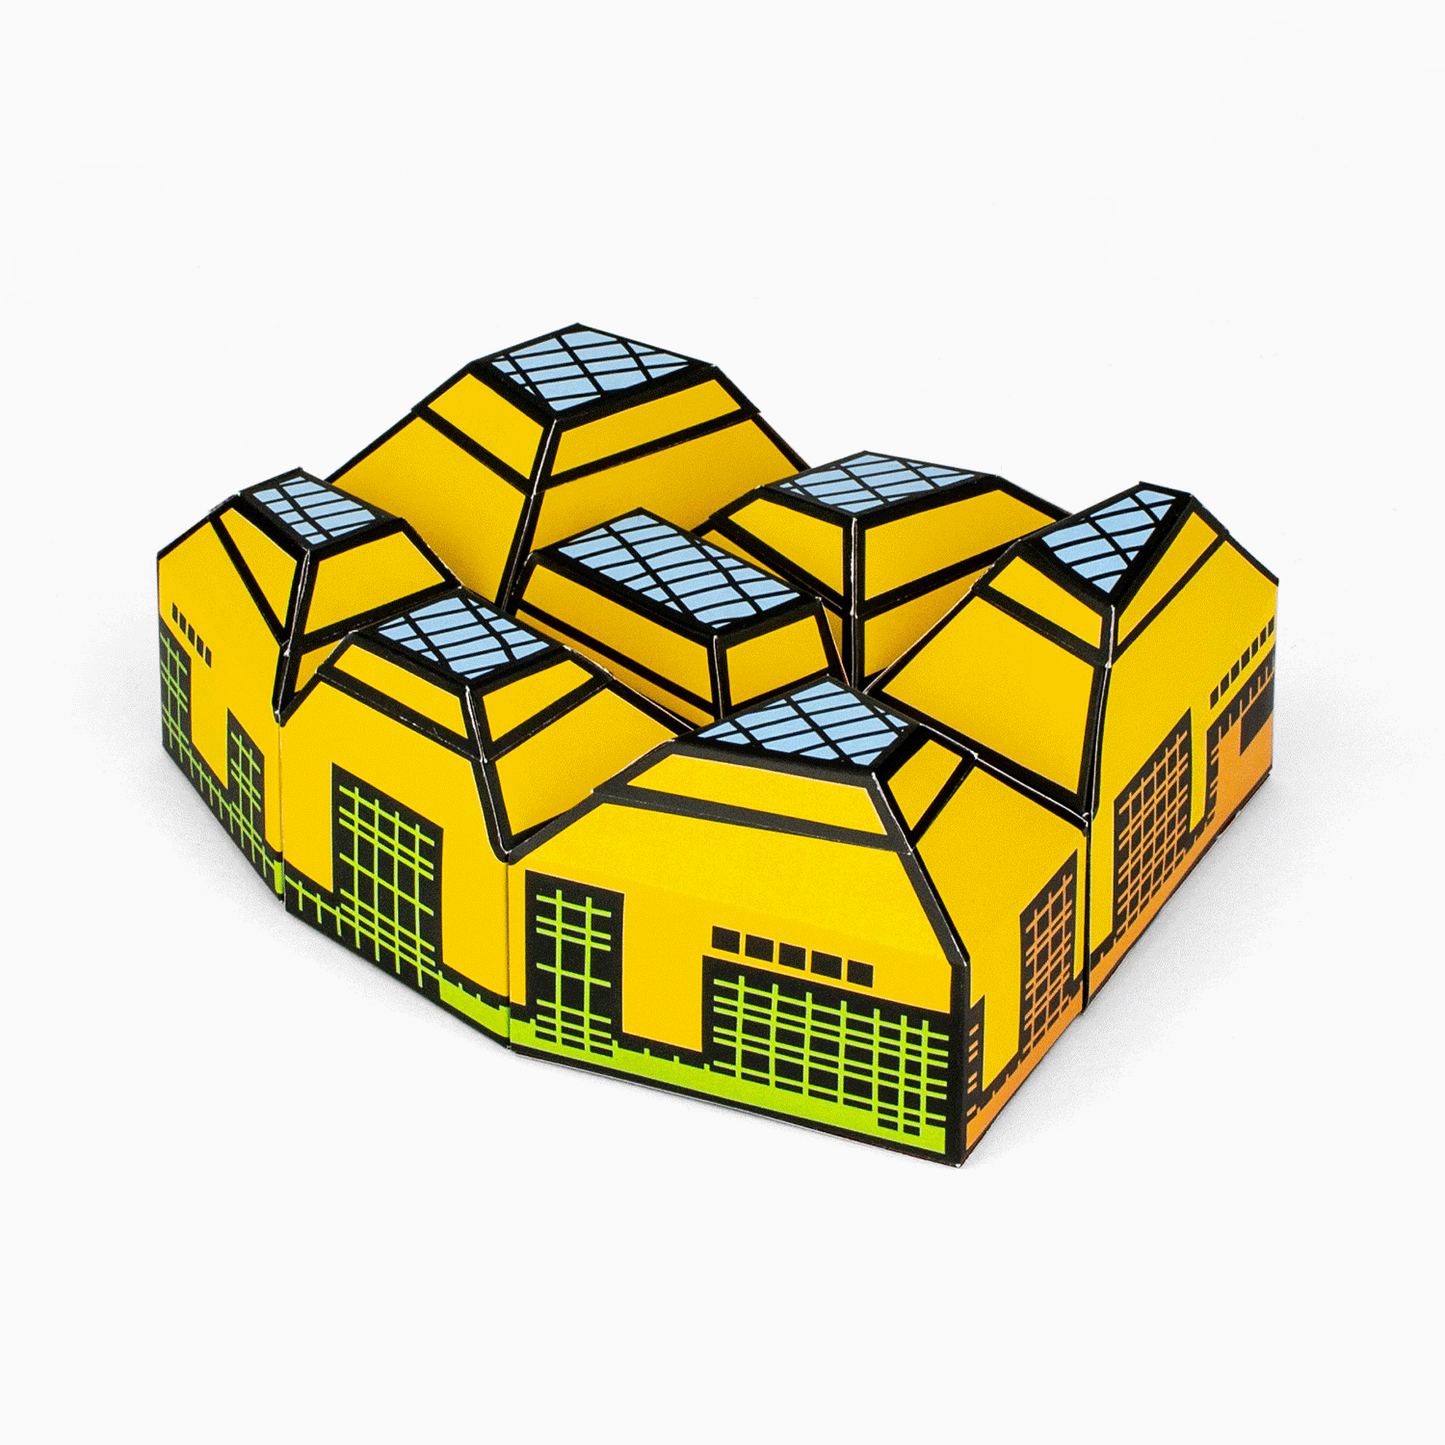 Foxetroo Cut-out Paper Model of The Hive Library in Worcester